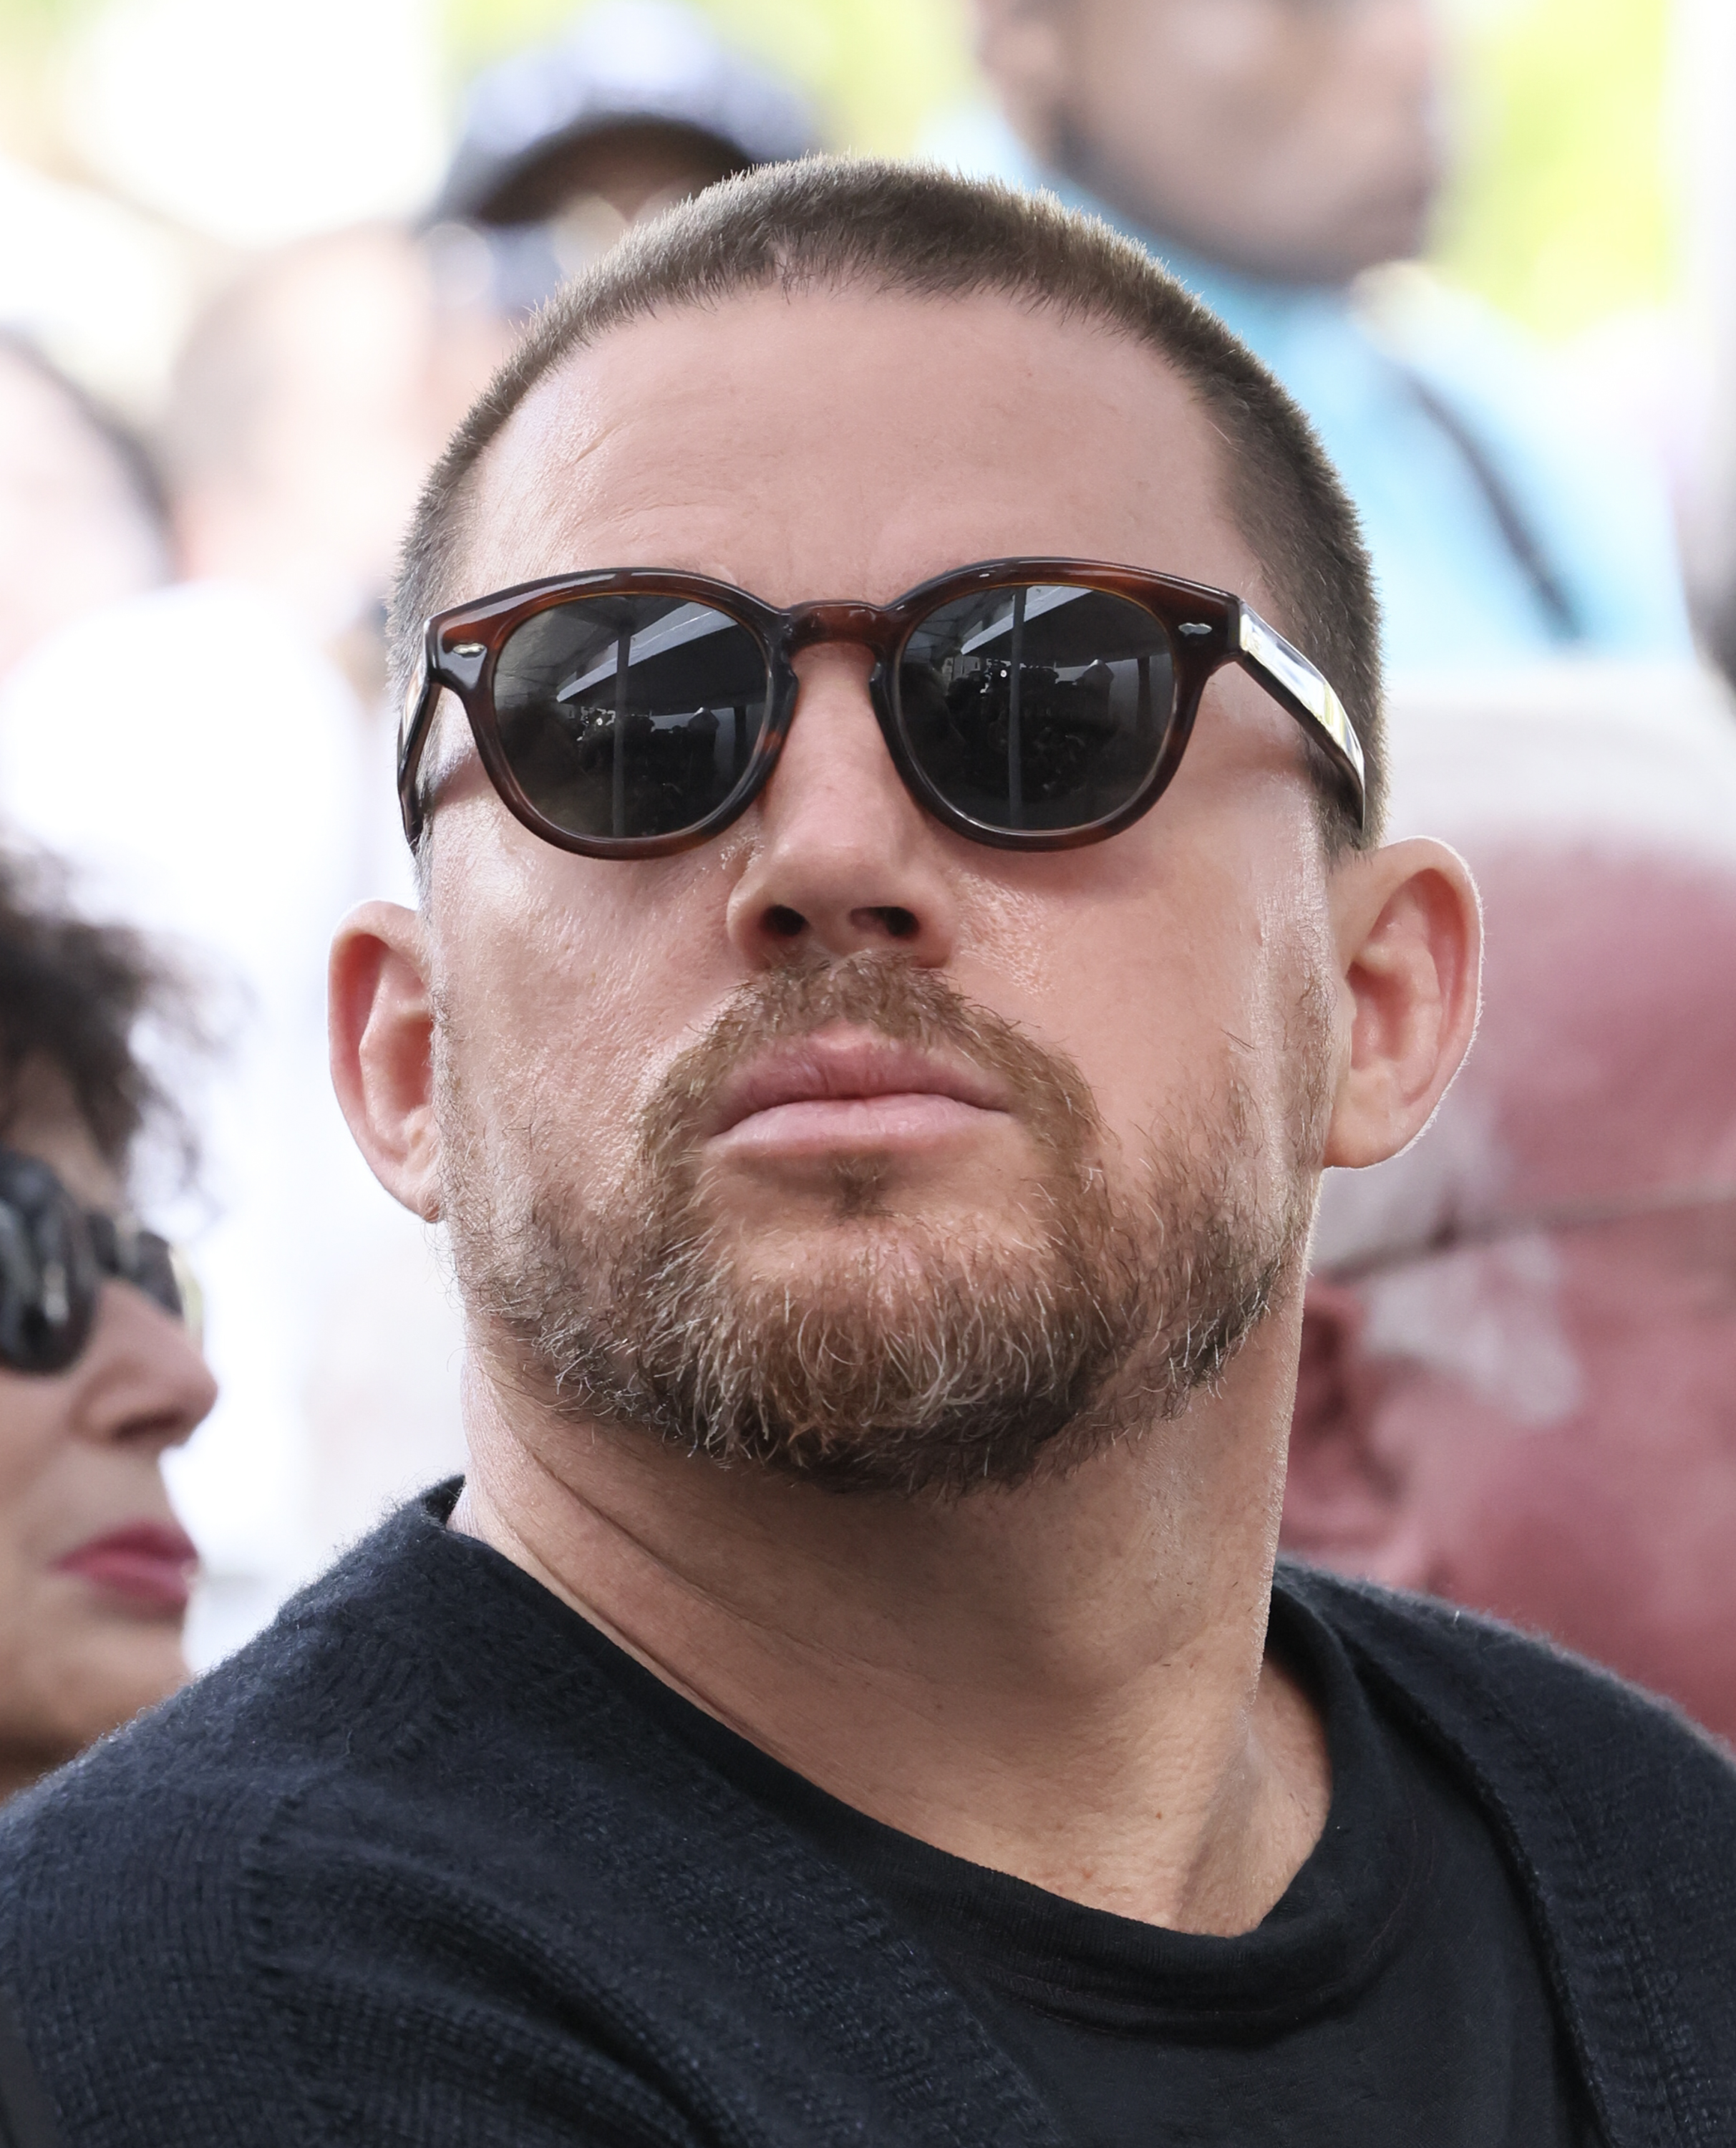 Close-up of Channing Tatum wearing sunglasses and a casual sweater at an outdoor event